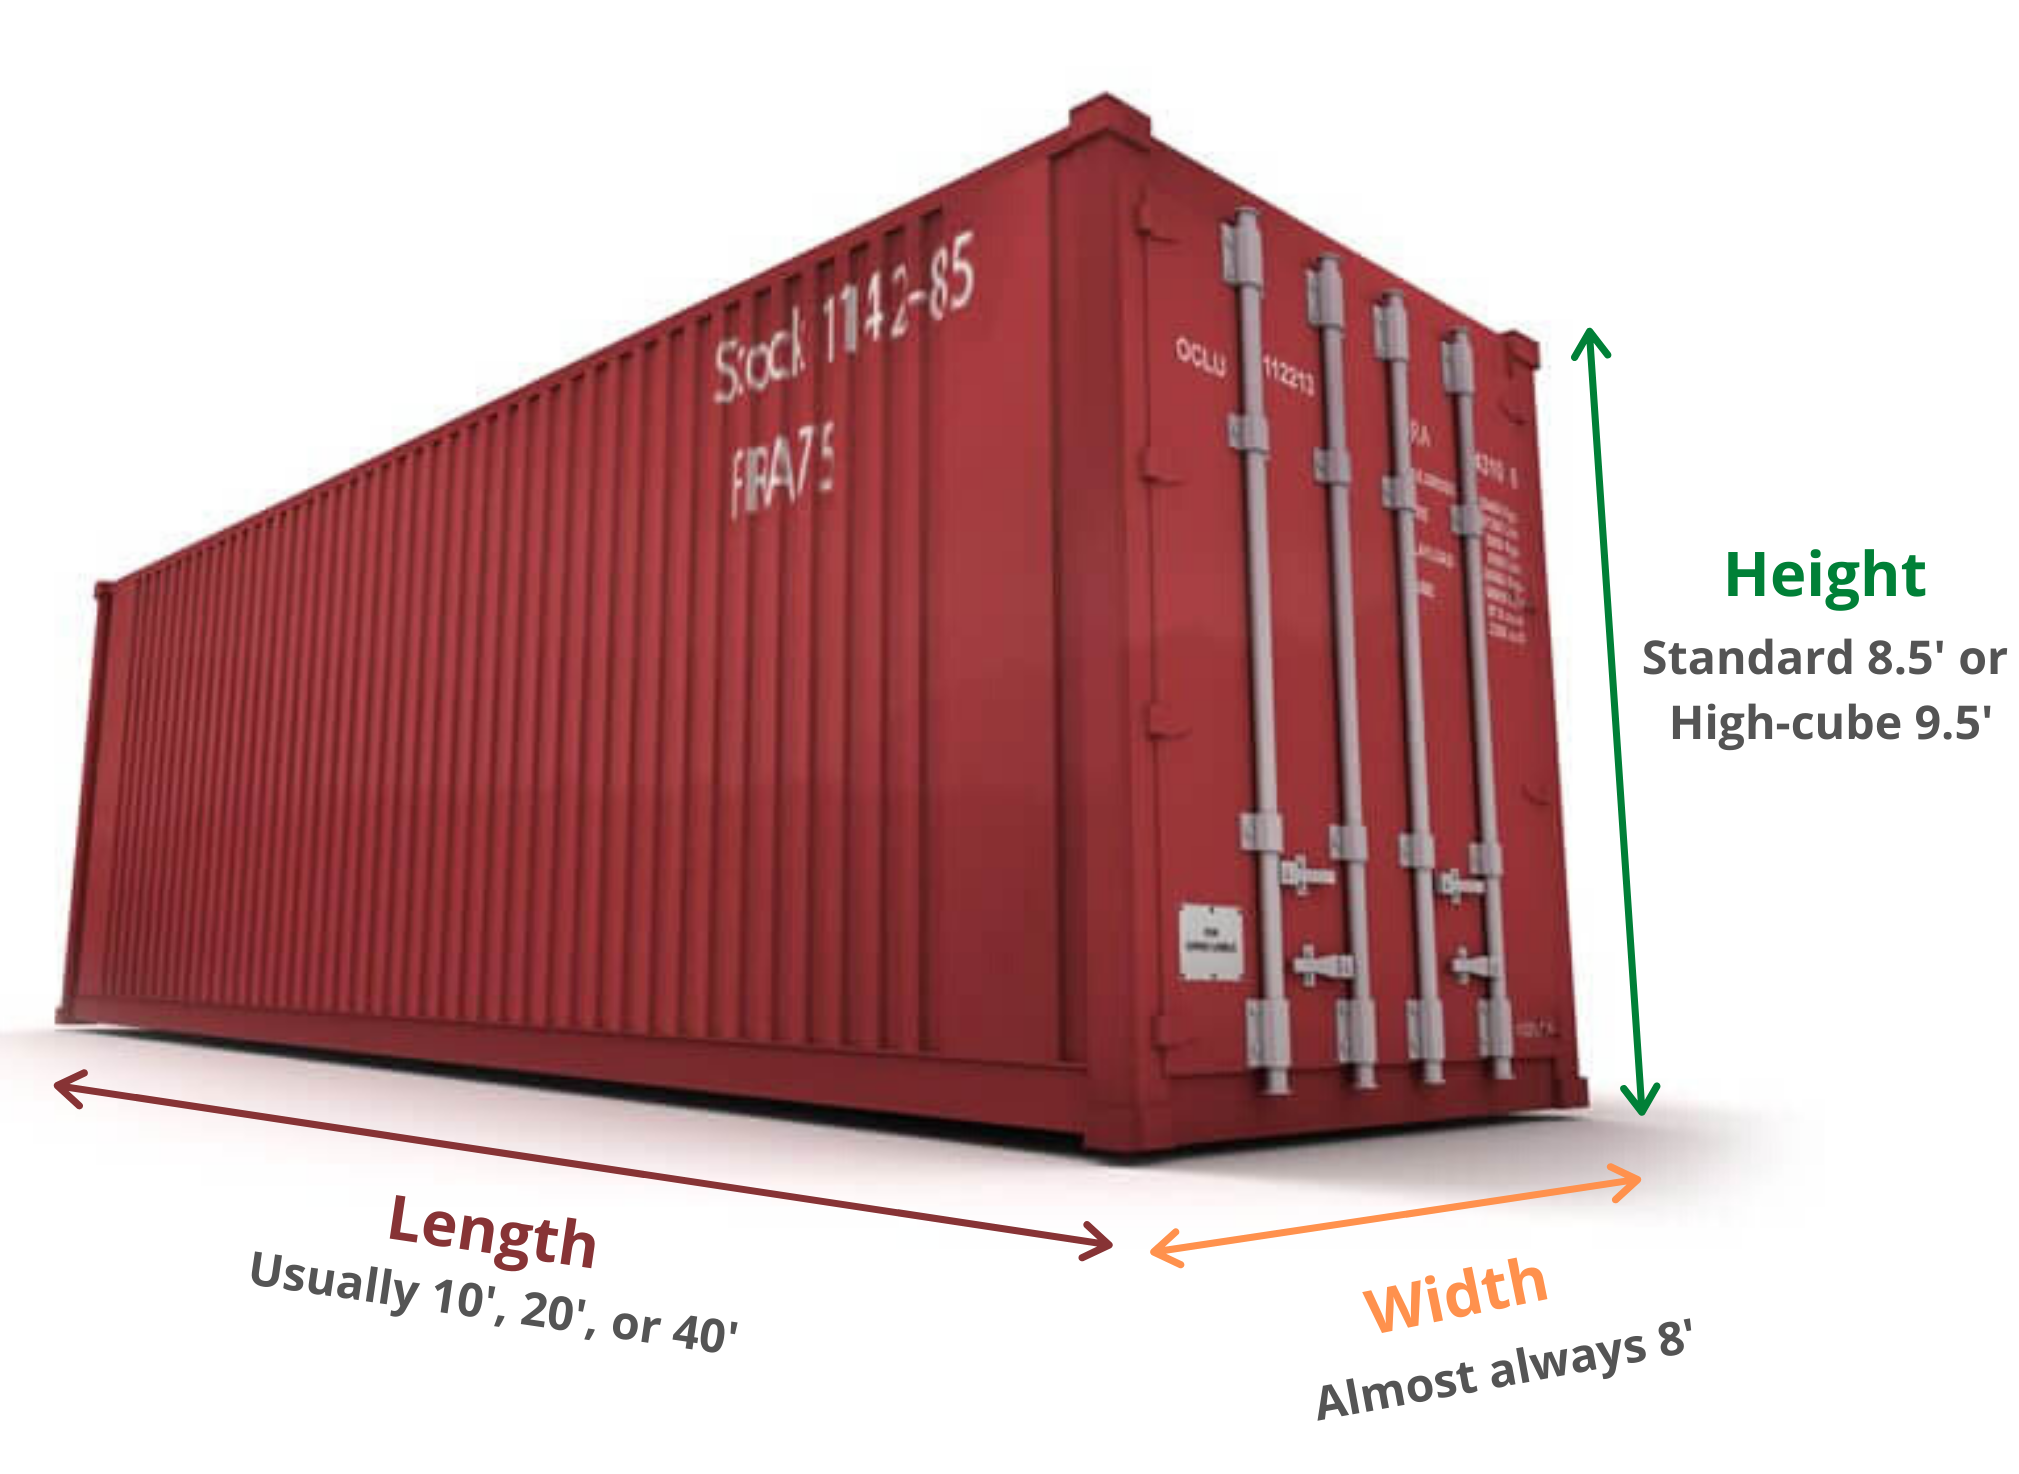 How Many Square Feet Is 1 Container?